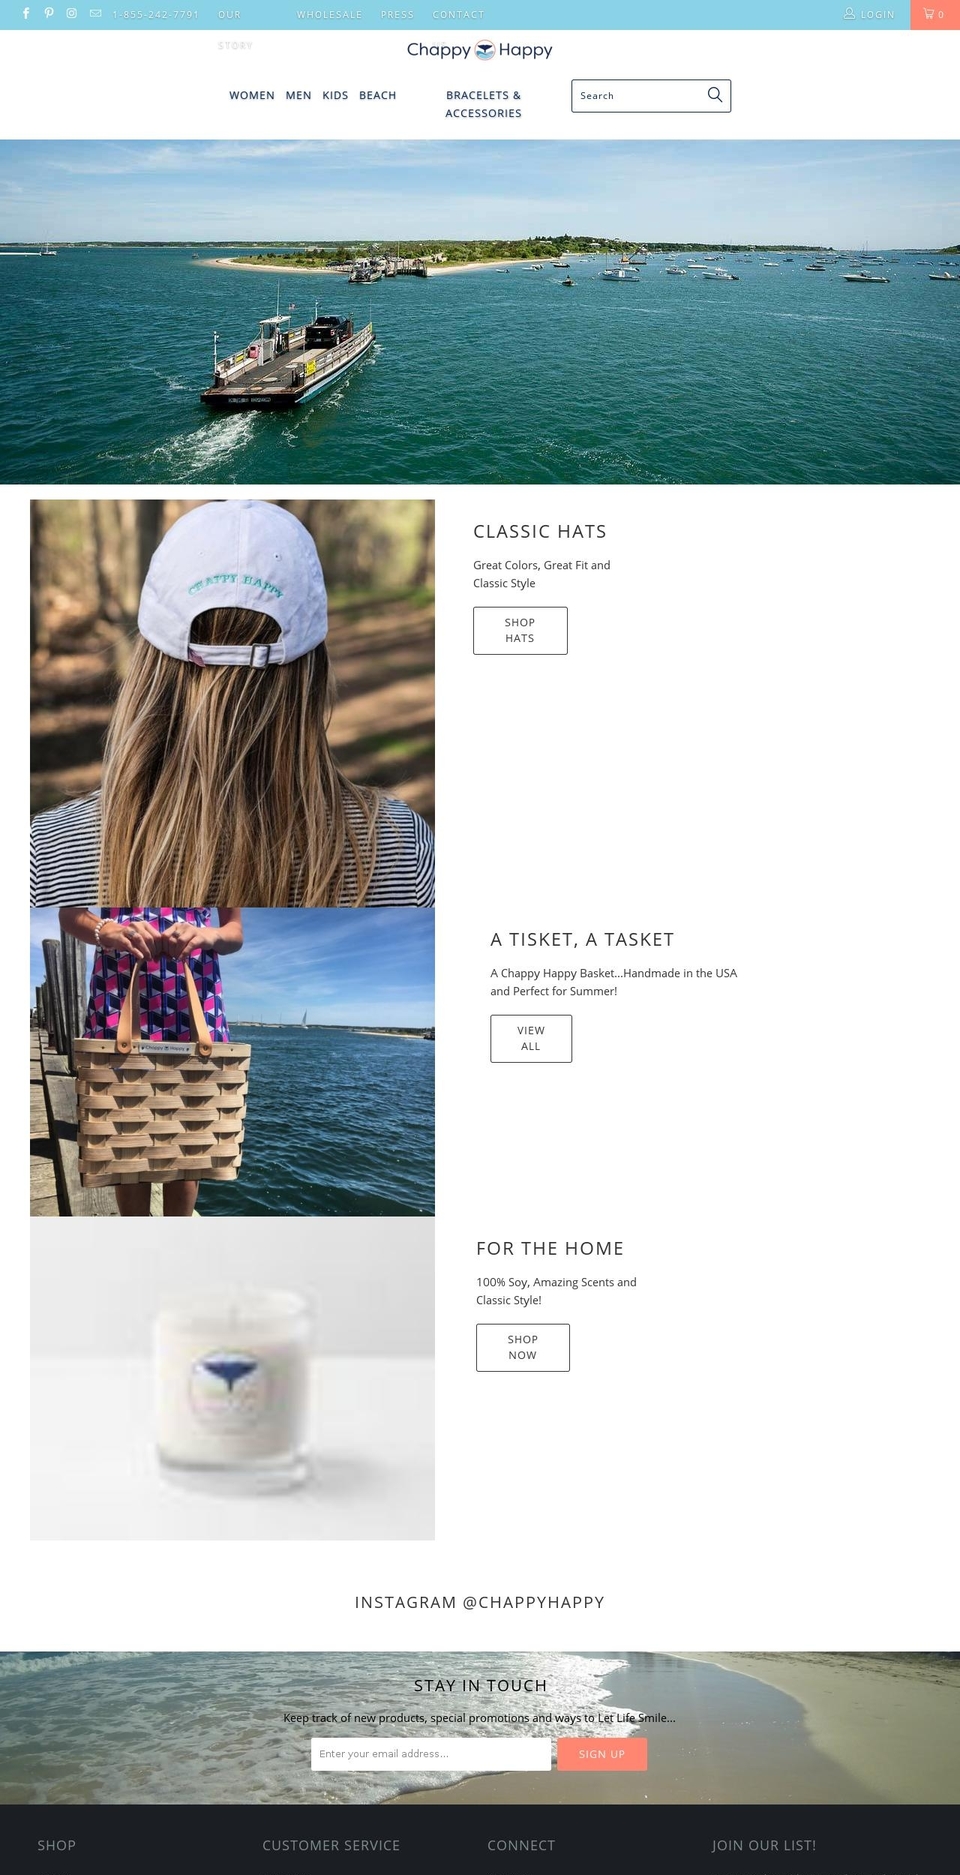 CH-Spring-2018-July-2-2018 Shopify theme site example chappyhappy.net